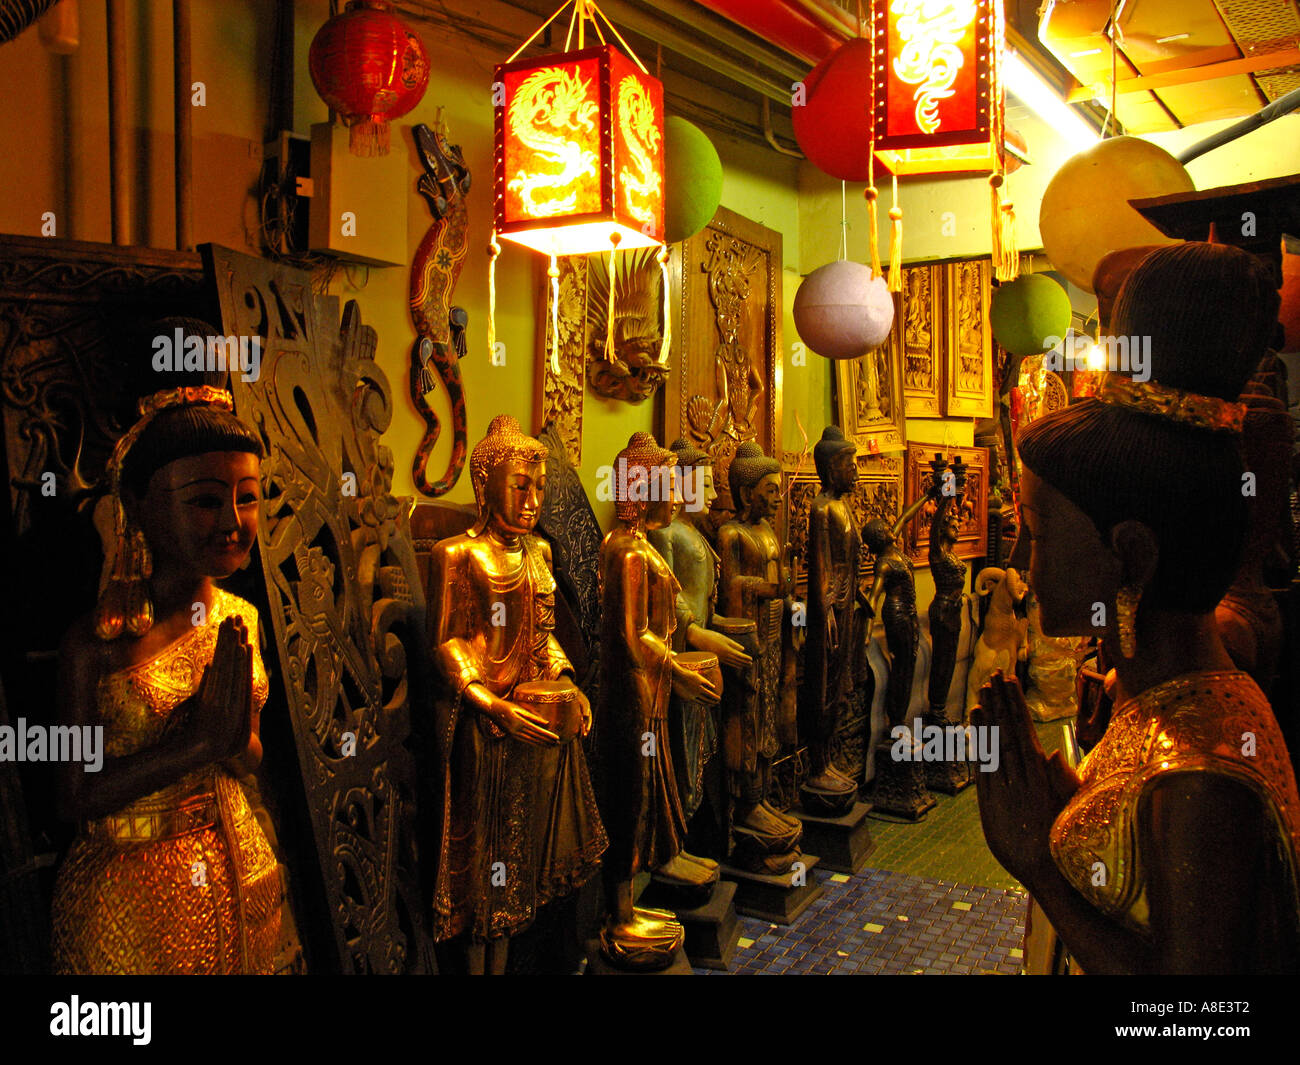 Asian shop with Buddhas Stock Photo